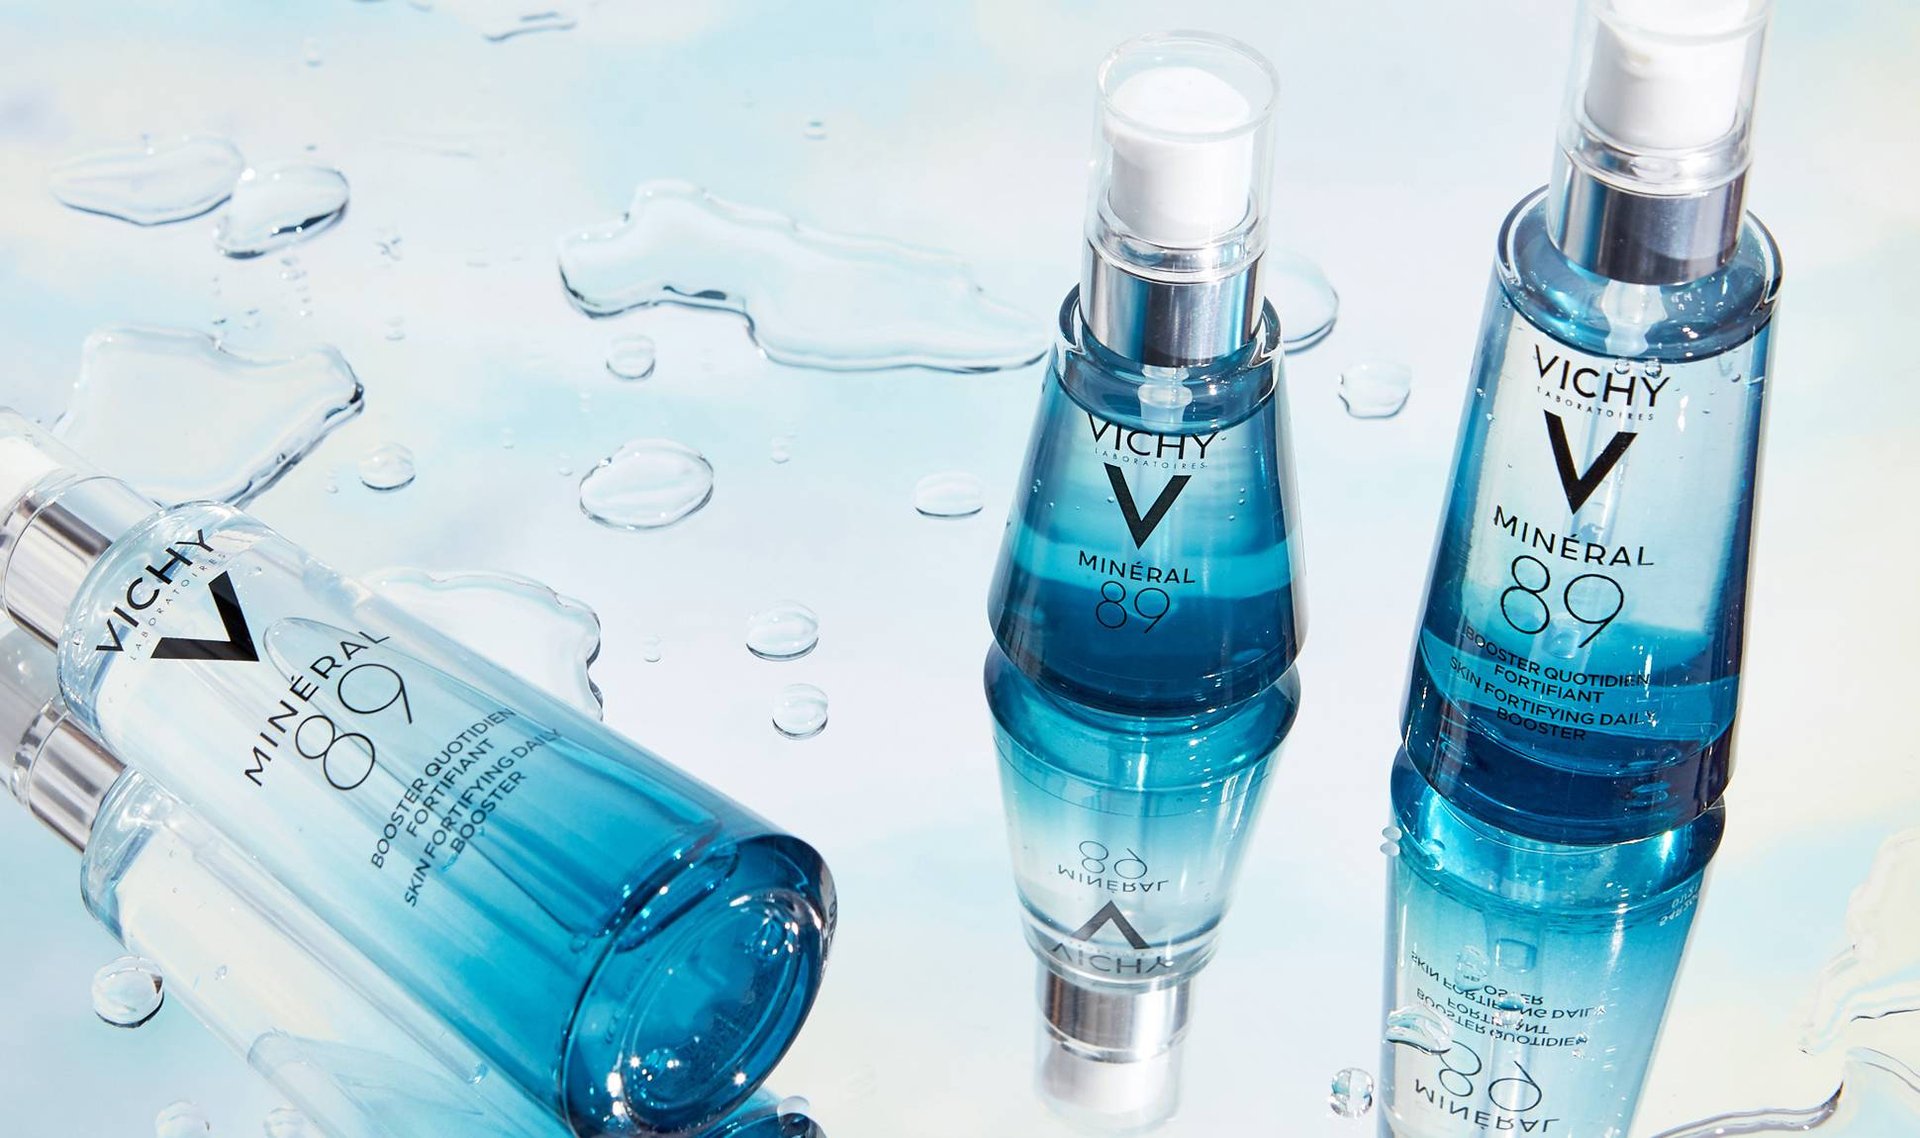 I Tried It: Serum-Lovers Will Obsess Over Vichy’s Minéral 89